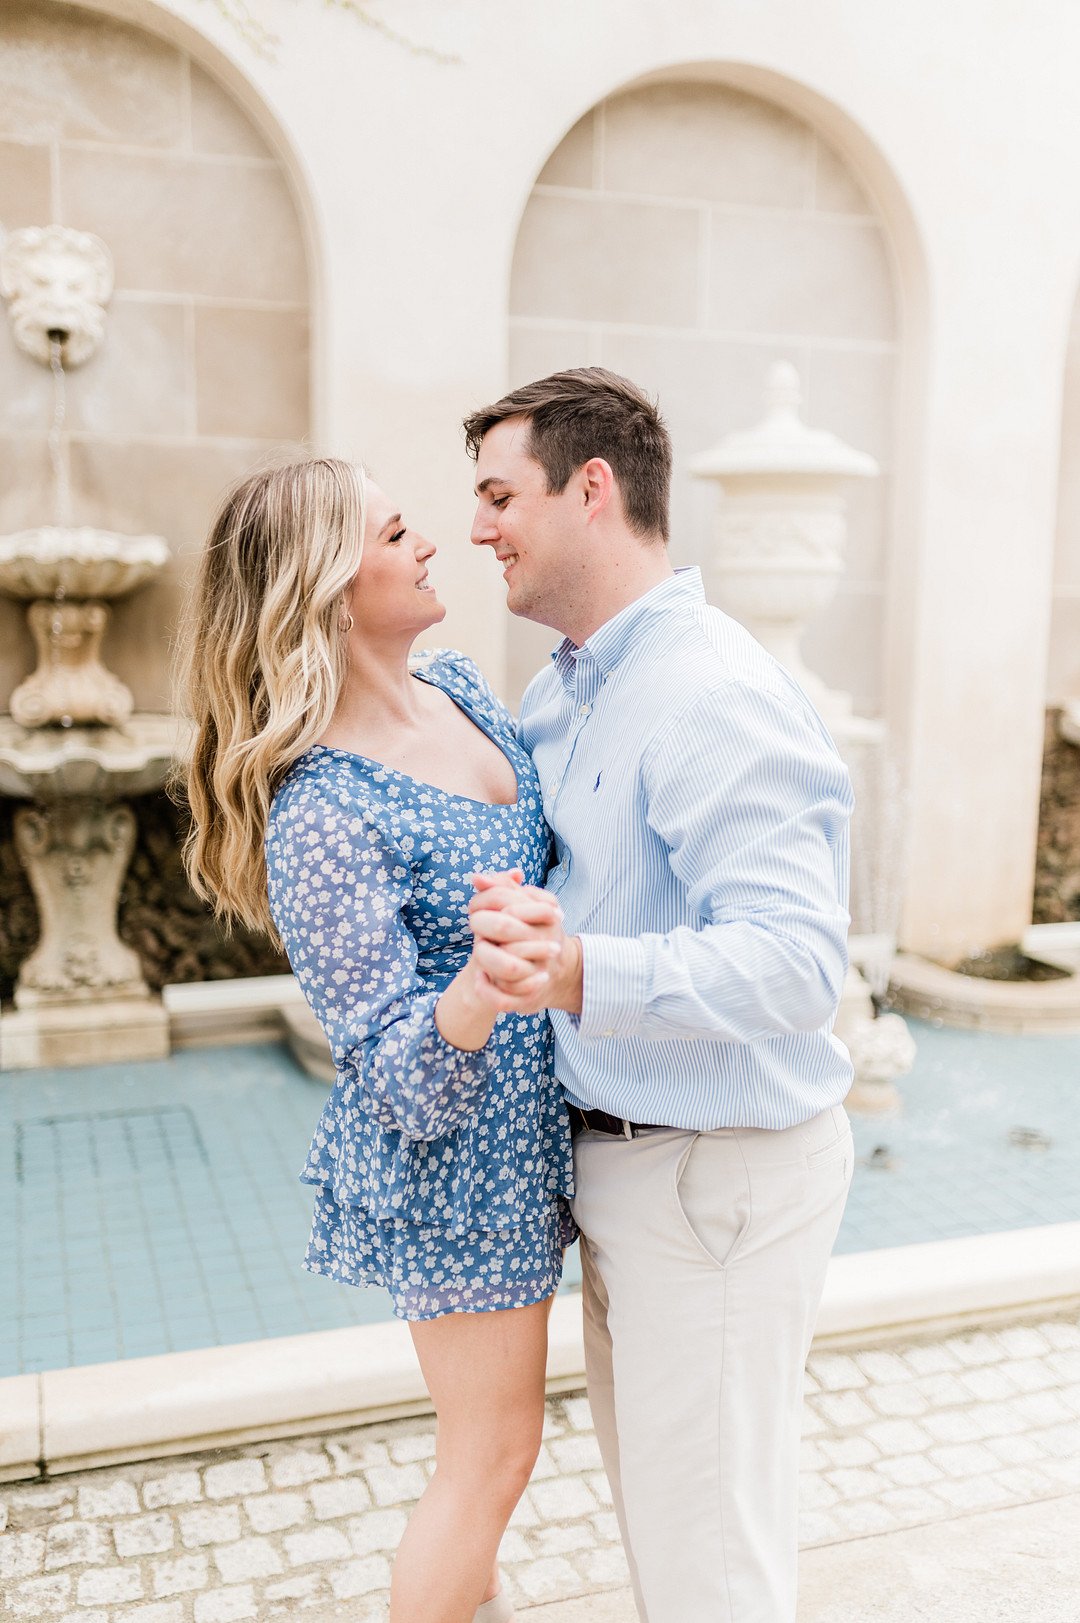 A Tuscan Inspired Engagement Session at Philadelphia’s Longwood Gardens